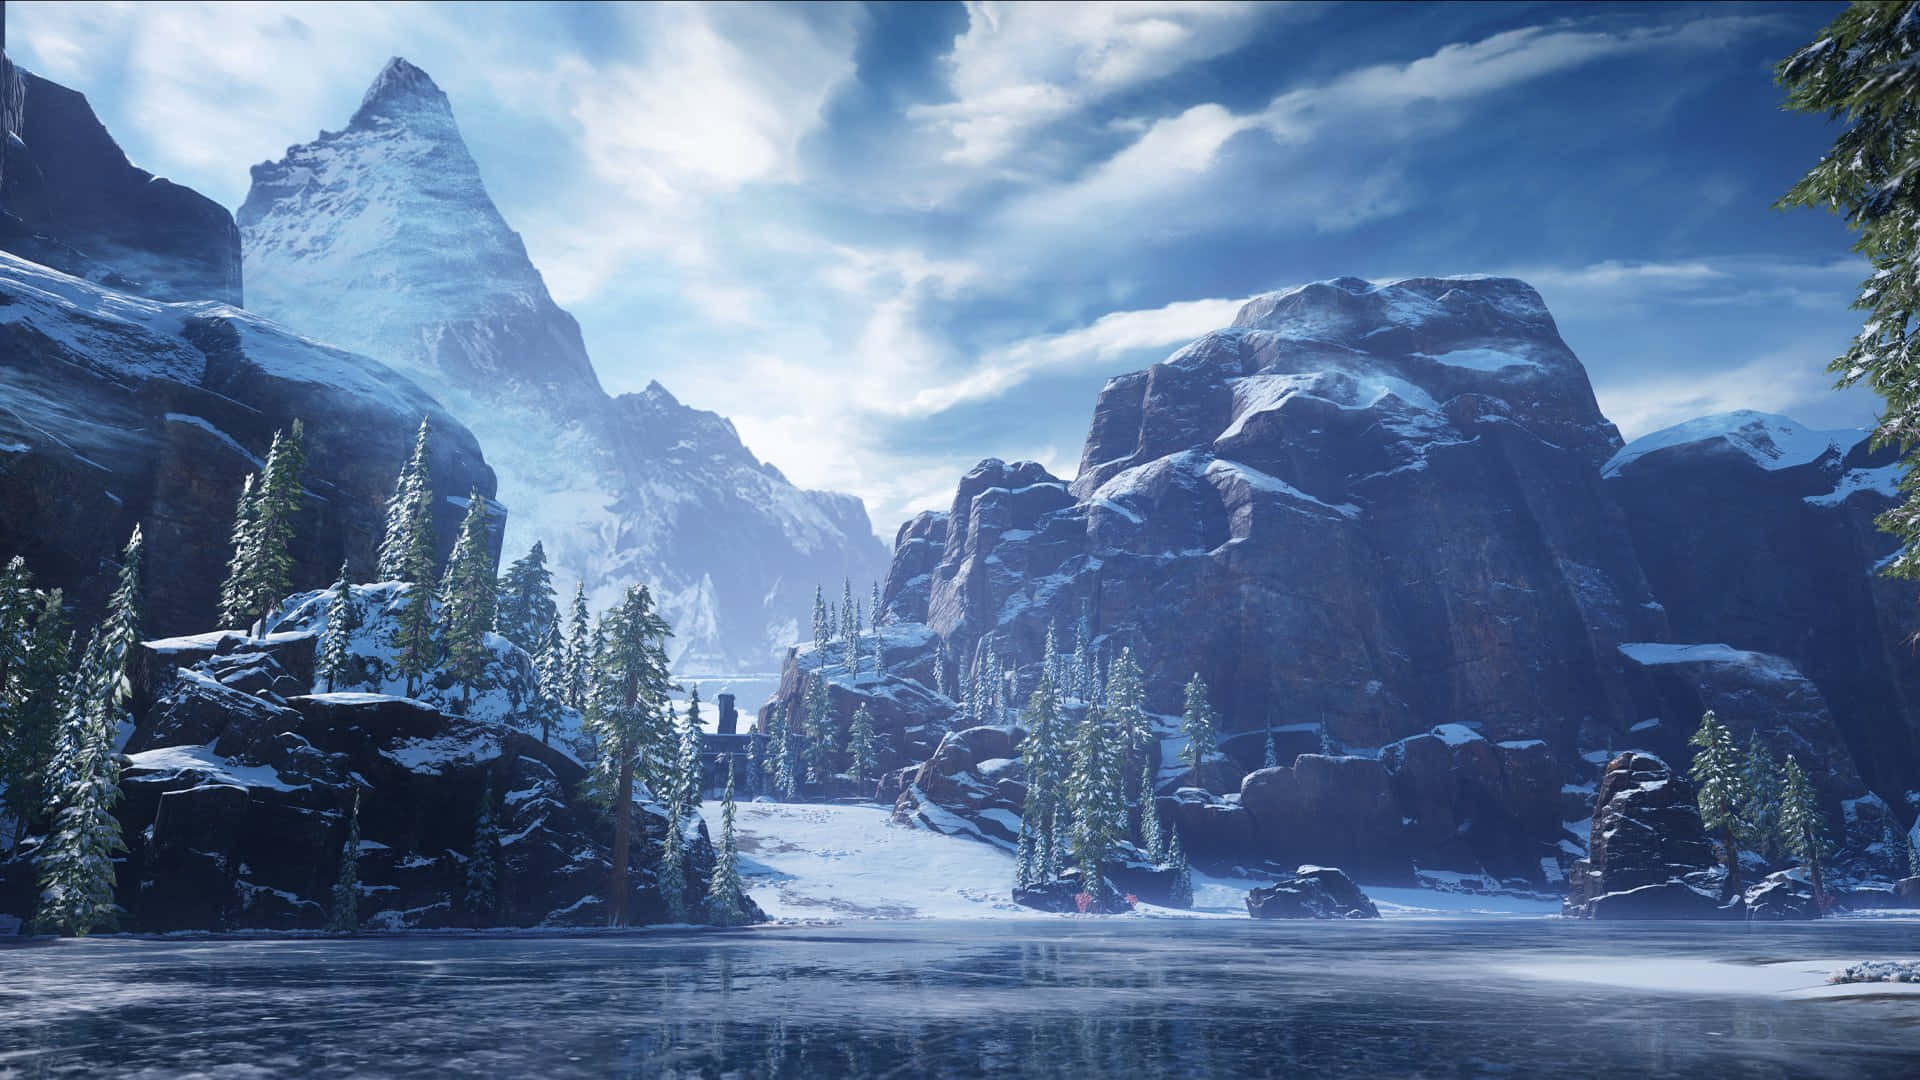 A Snowy Mountain Scene With Trees And Mountains